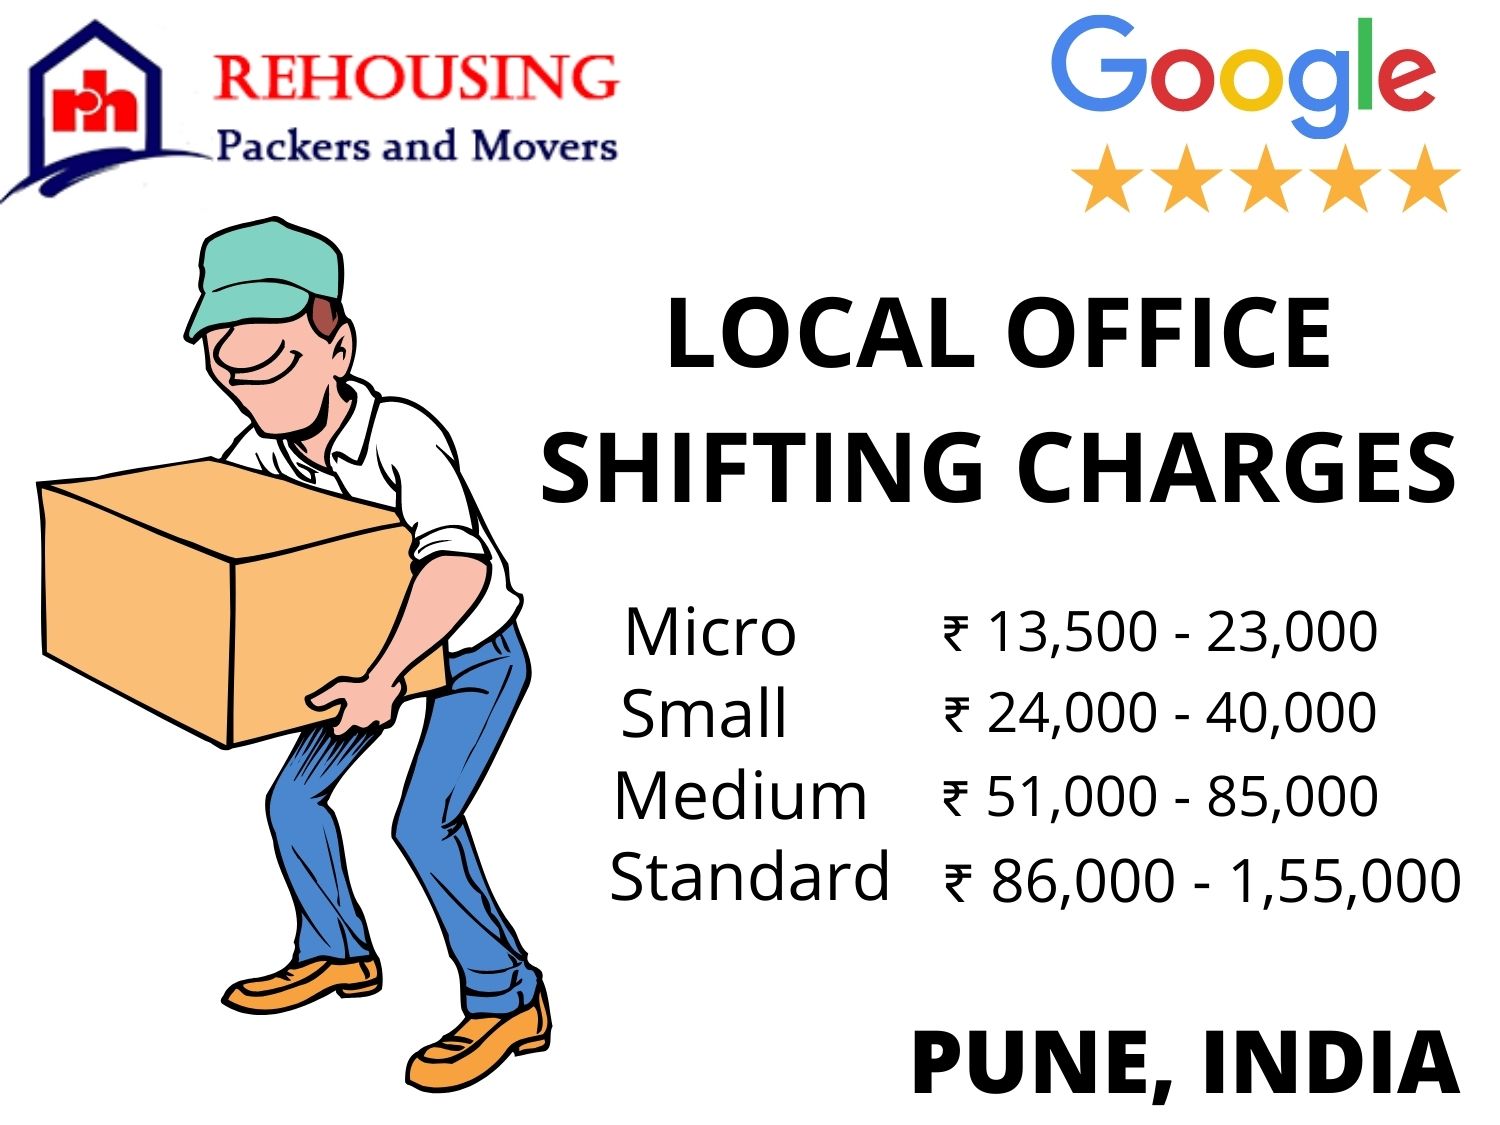 transportation costs ranging from Rs 1,000 to Rs. 10,000, and packing material costs ranging from Rs. 1,500 to Rs. 6, 000 in Pune